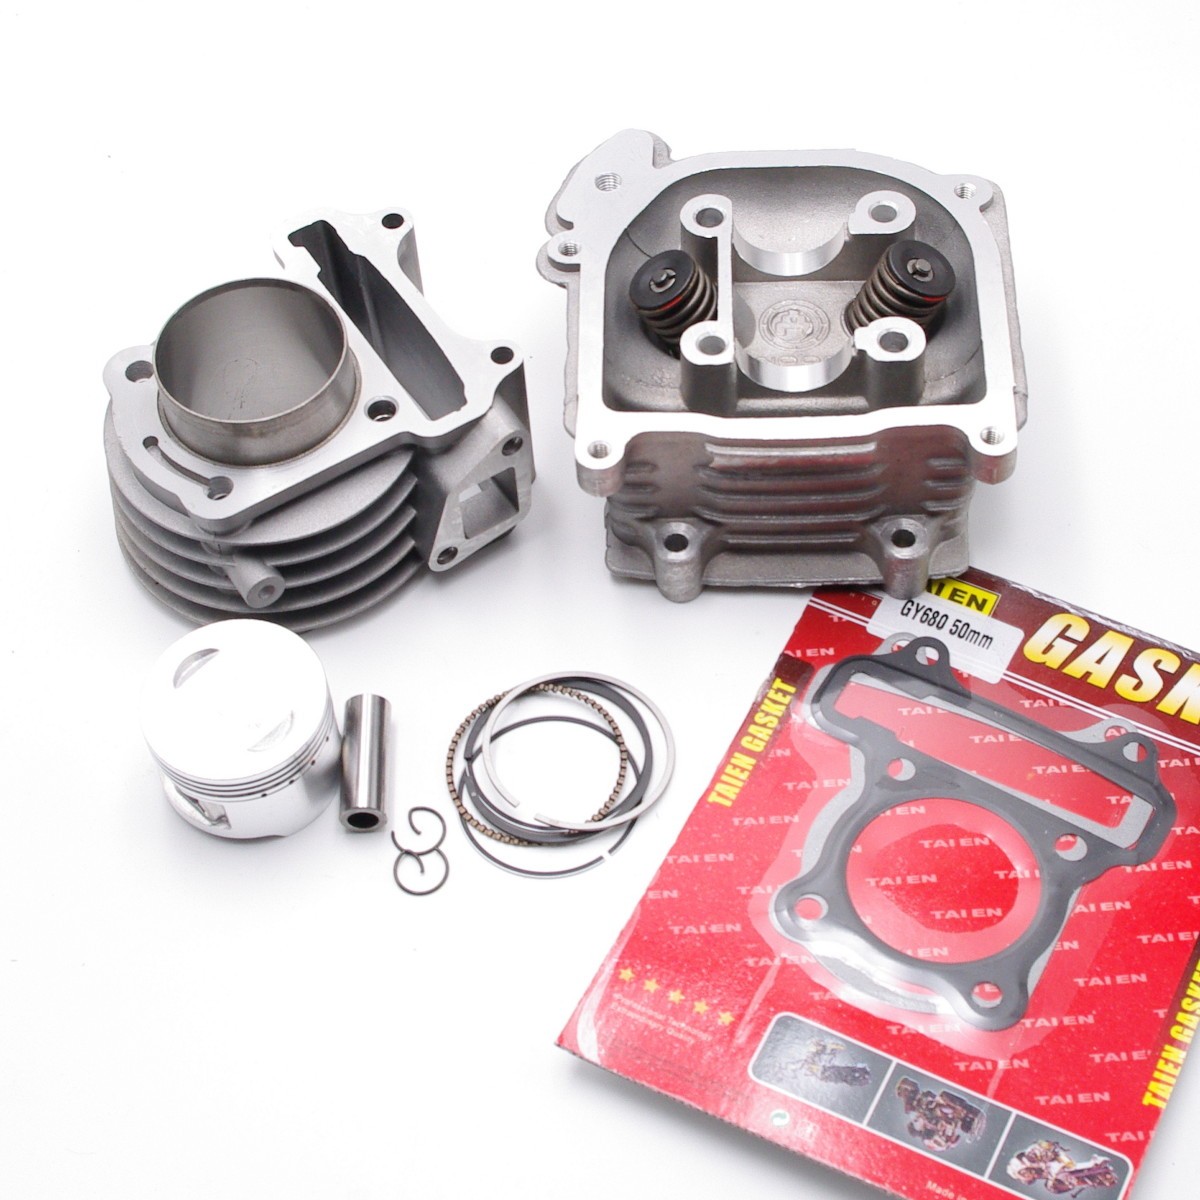 Kit cylindre 50ccm pour scooter 4T Chine, Baotian, Rex RS450, MKS